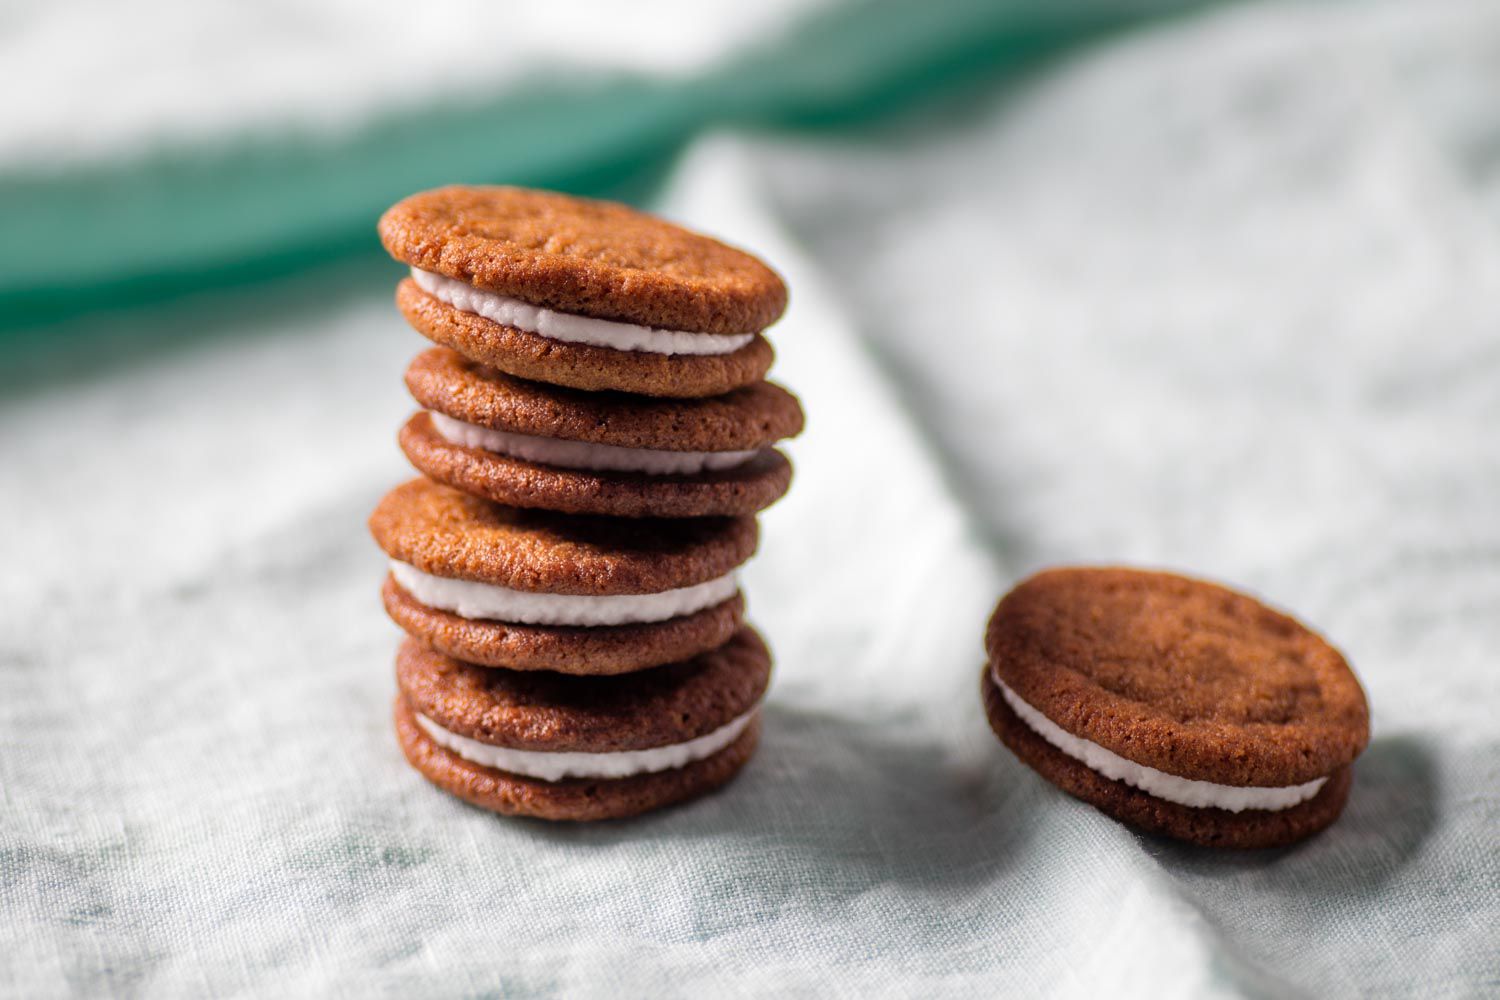 A tall stack of the lemon-ginger sandwich cookies, with a stray cookie off to one side.